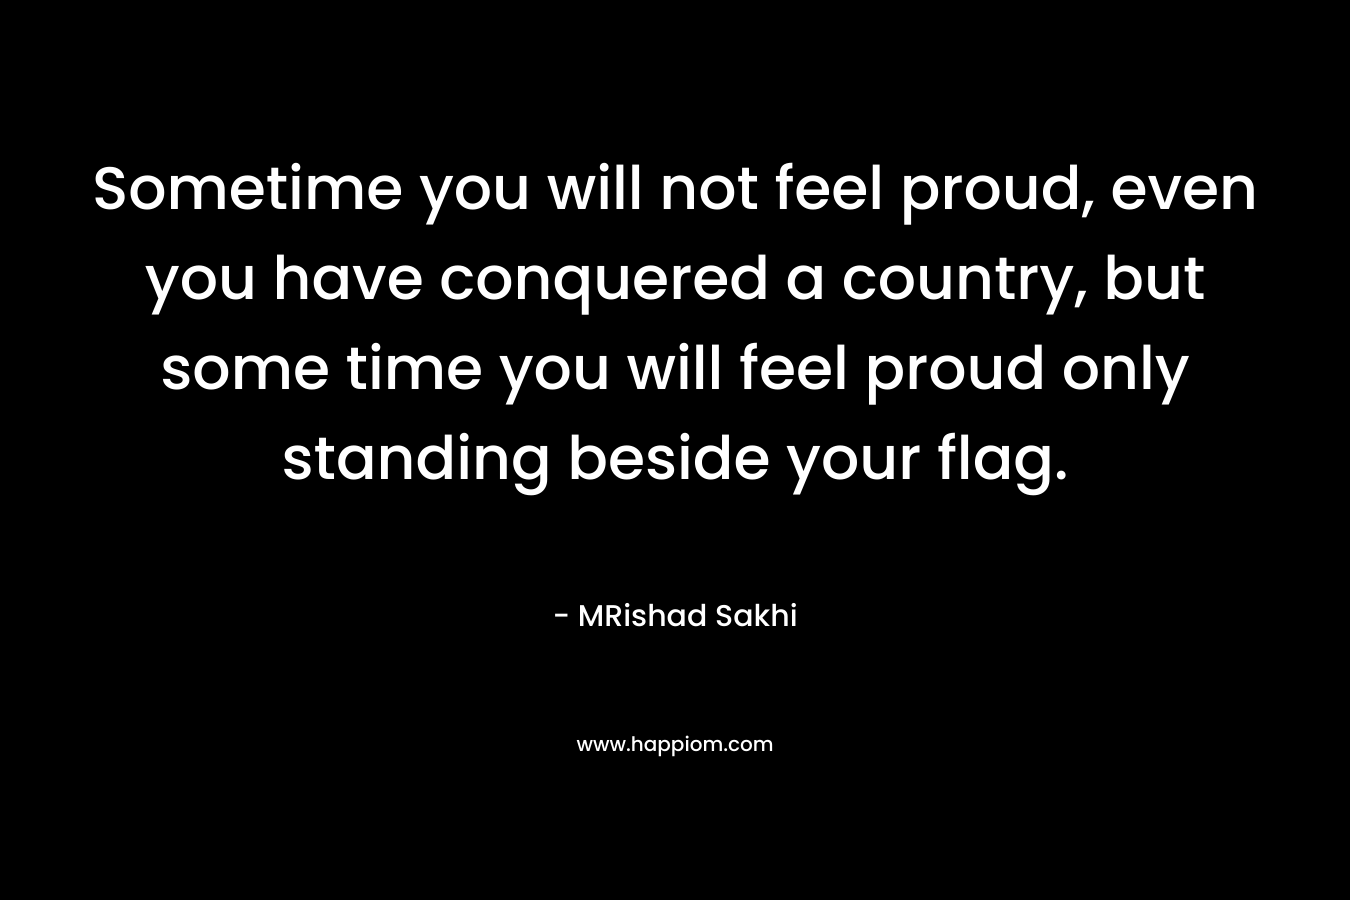 Sometime you will not feel proud, even you have conquered a country, but some time you will feel proud only standing beside your flag.